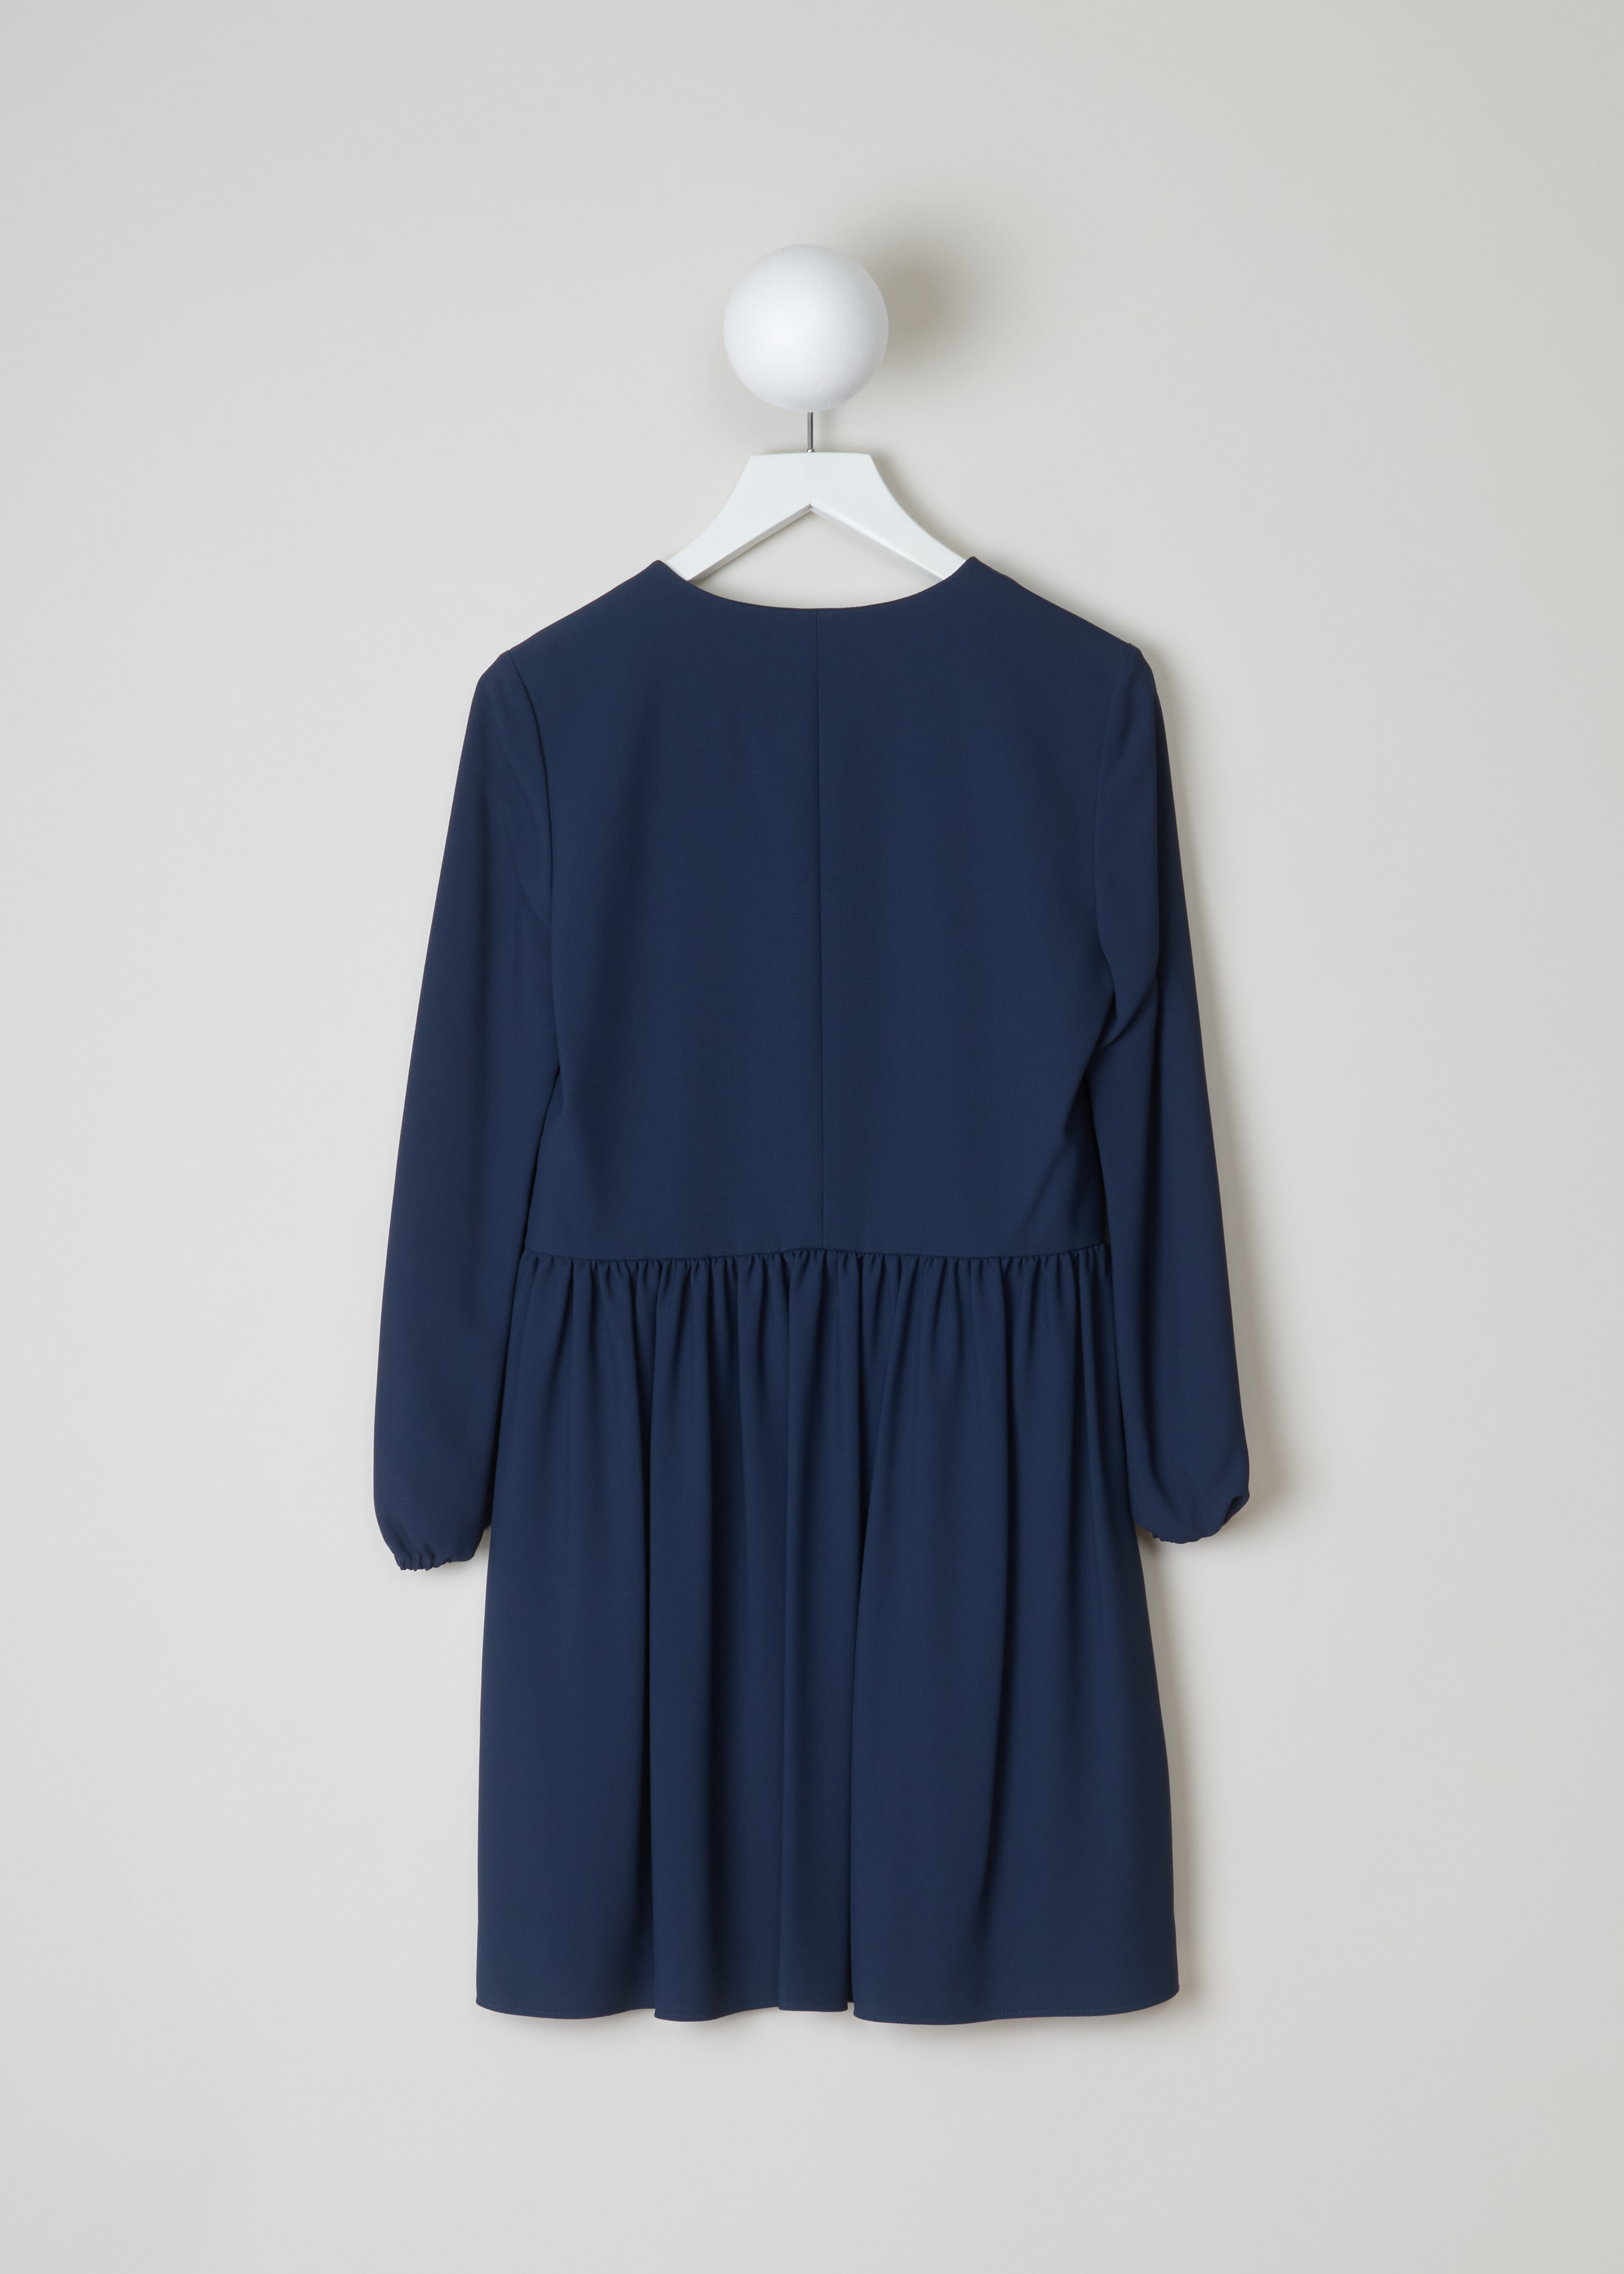 Chloé Gathered deep blue dress 17SRO65_17S37_7B5 deep blue back. Deep blue dress with a V-neck. This model has loose sleeves and gathered cuffs. The straight cut has small pleats around the waist and a midi length. As closure this dress has an invisible zipper on the side.